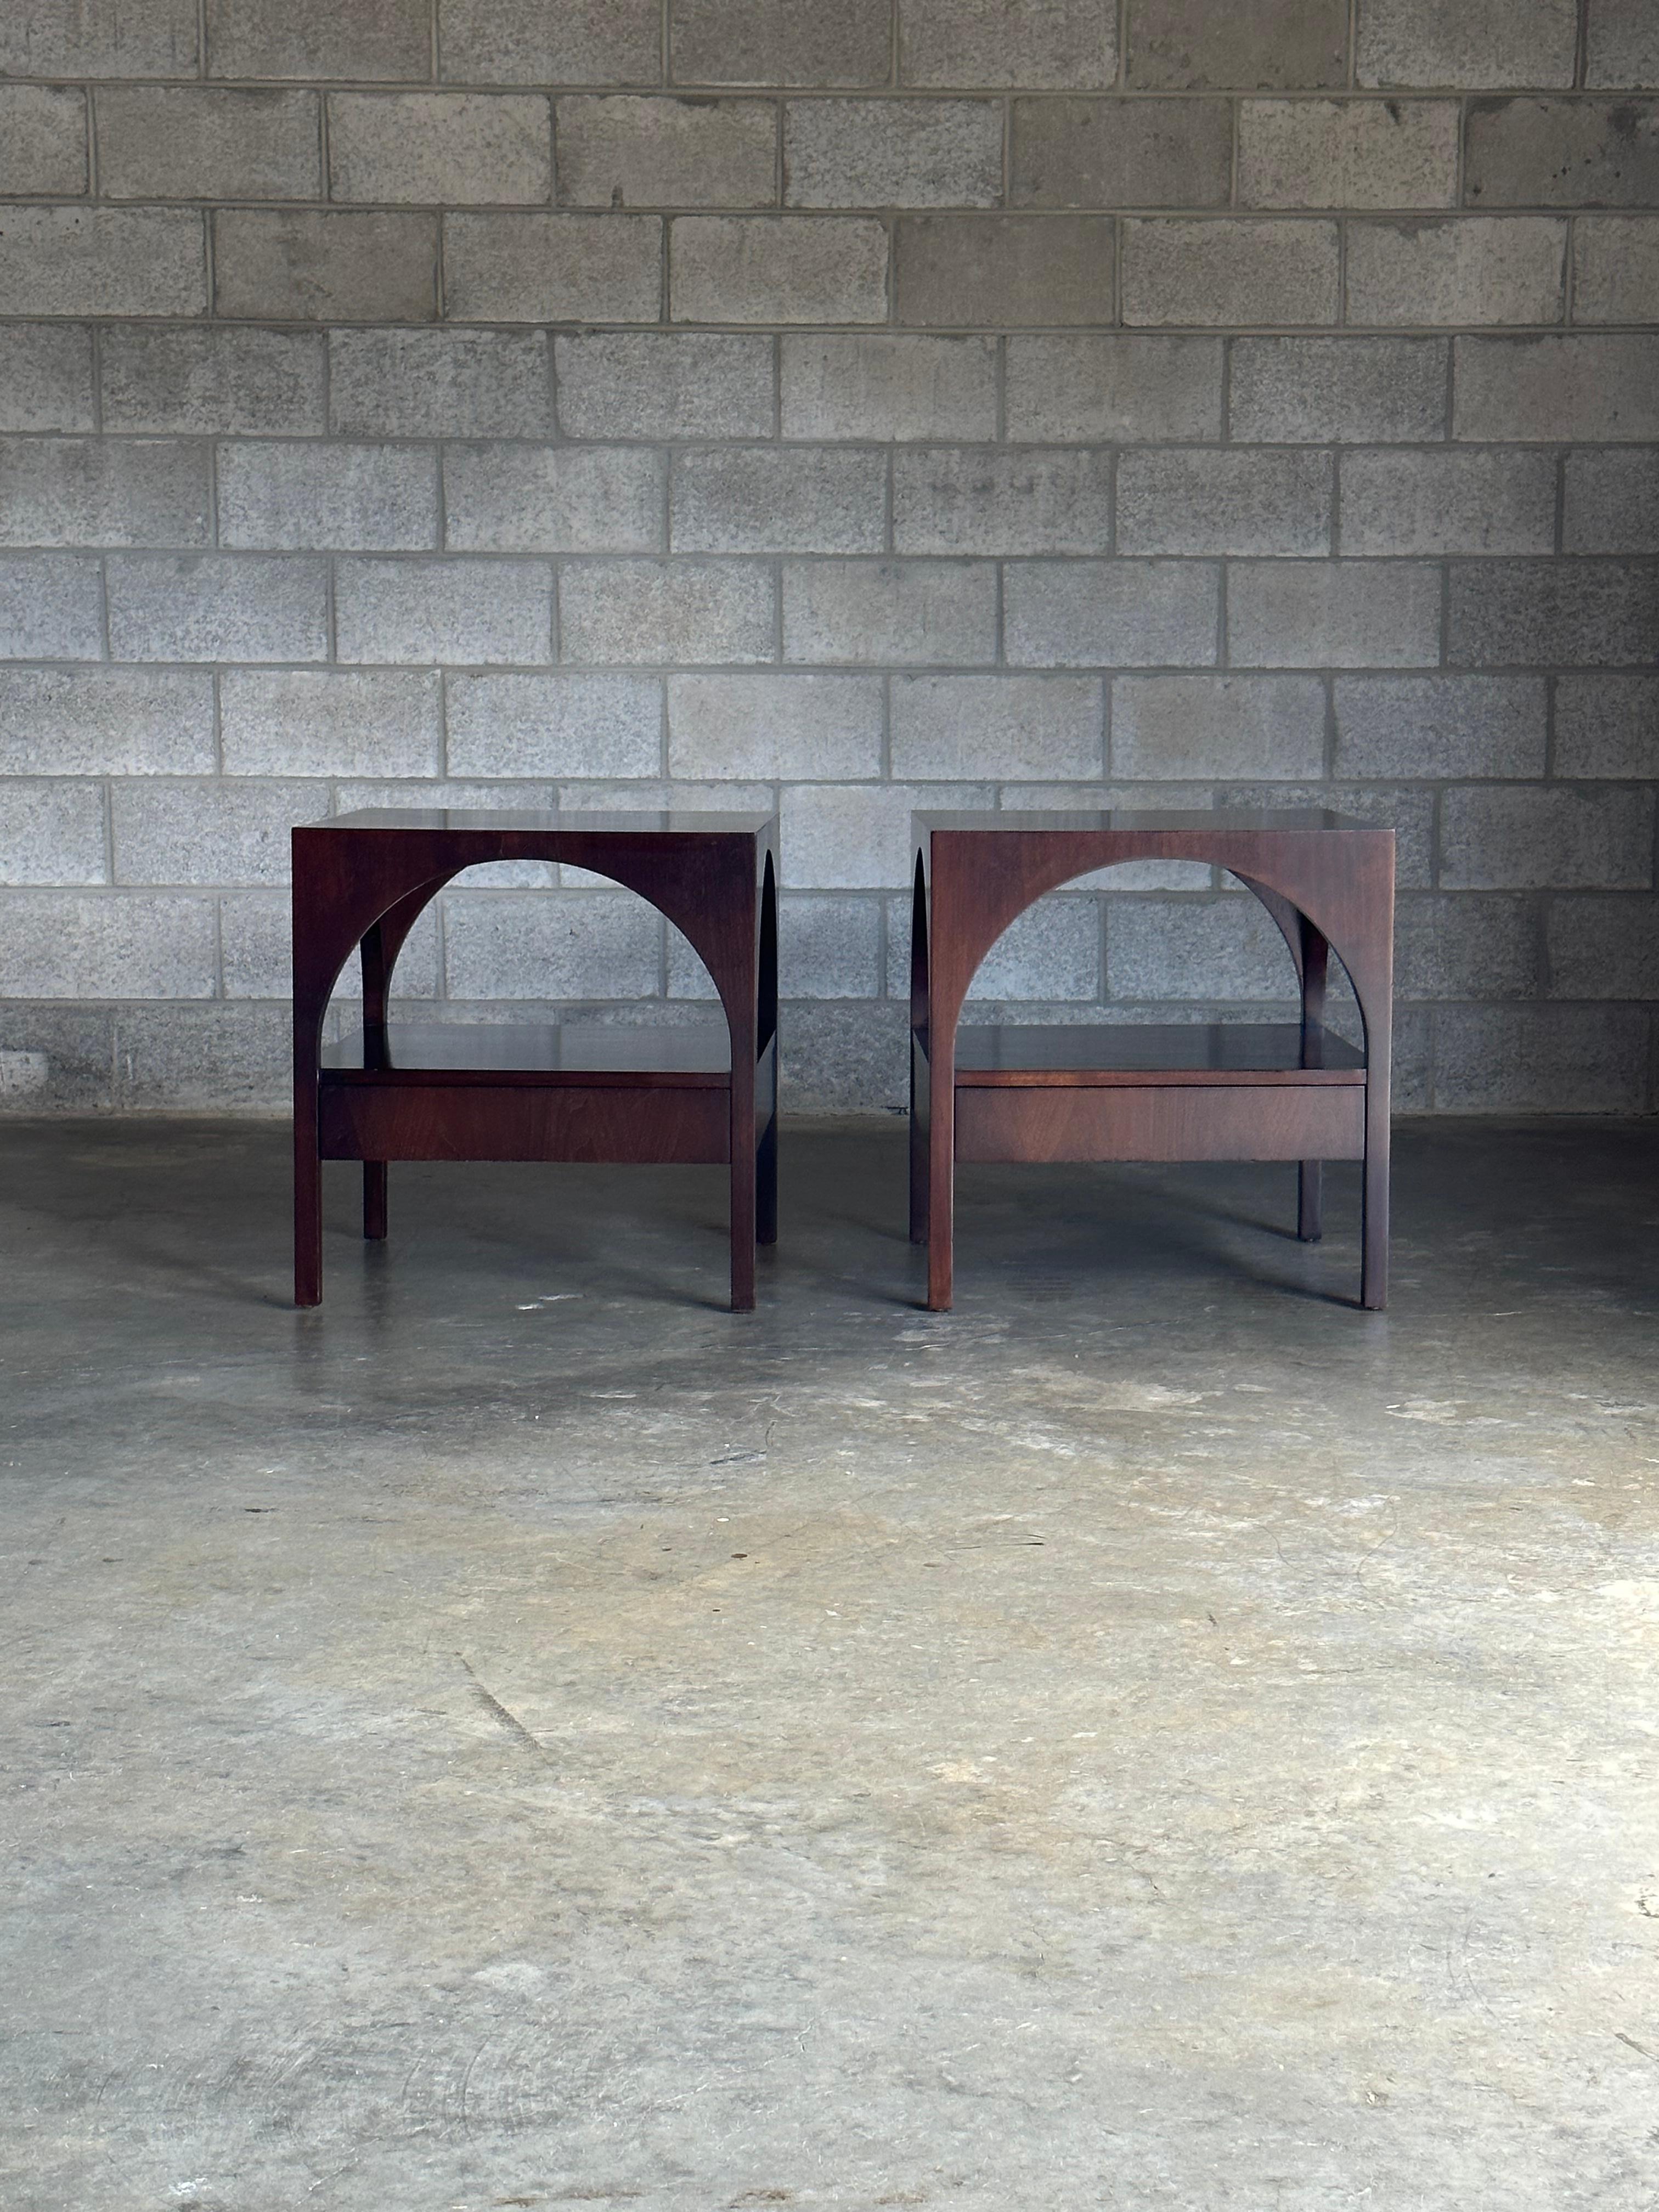 Rare pair of oversized end tables or nightstands by T.H. Robsjohn-Gibbings for Widdicomb “Coliseum”. These are an extremely uncommon design and unique to the market. They are well scaled with a single arch on every side and completely finished on